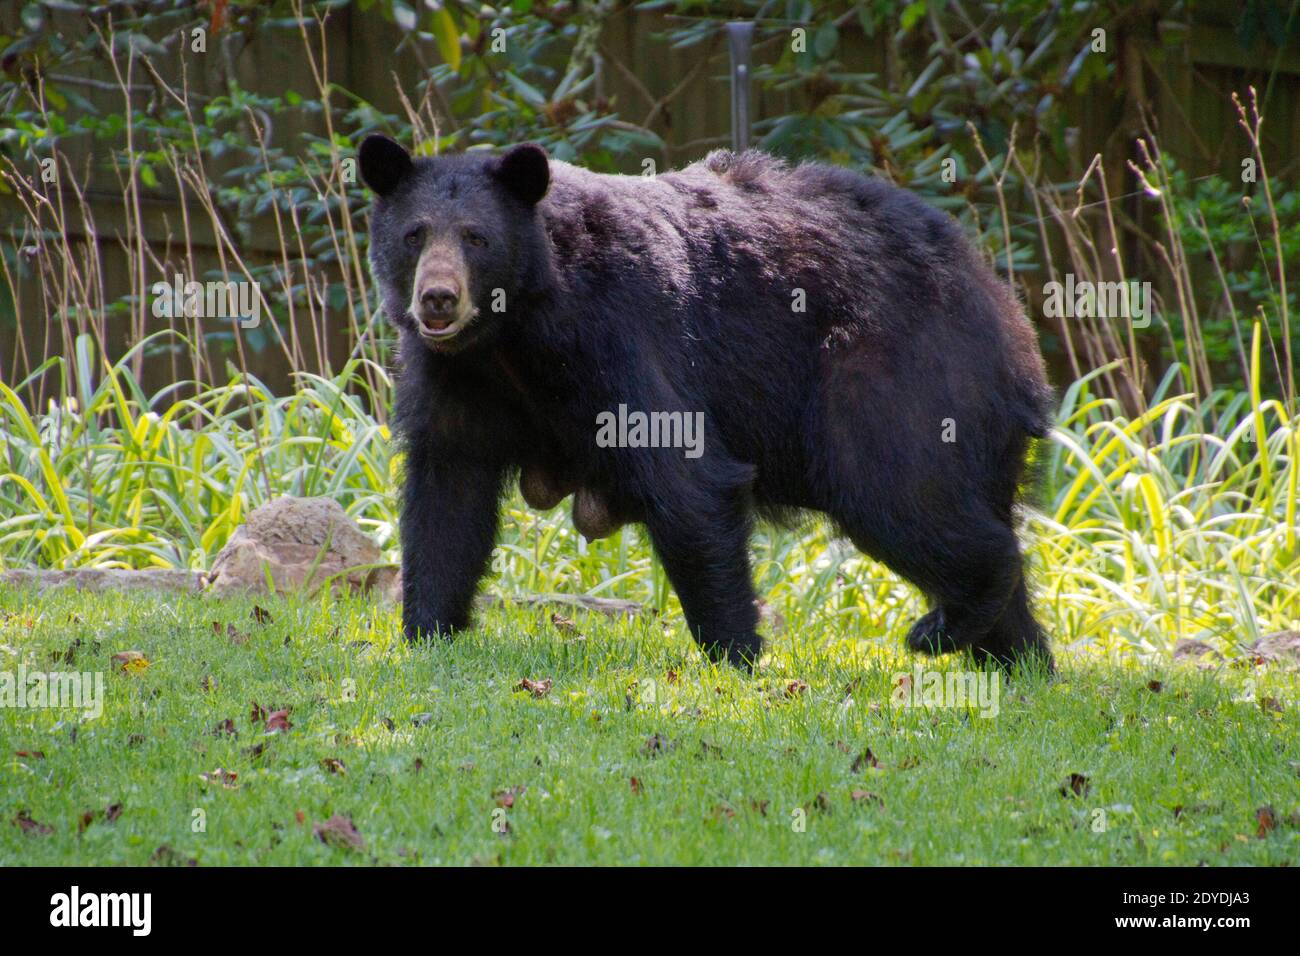 A lactating female black bear with hanging teats heavy with milk wanders across an urban back yard in summertime Stock Photo